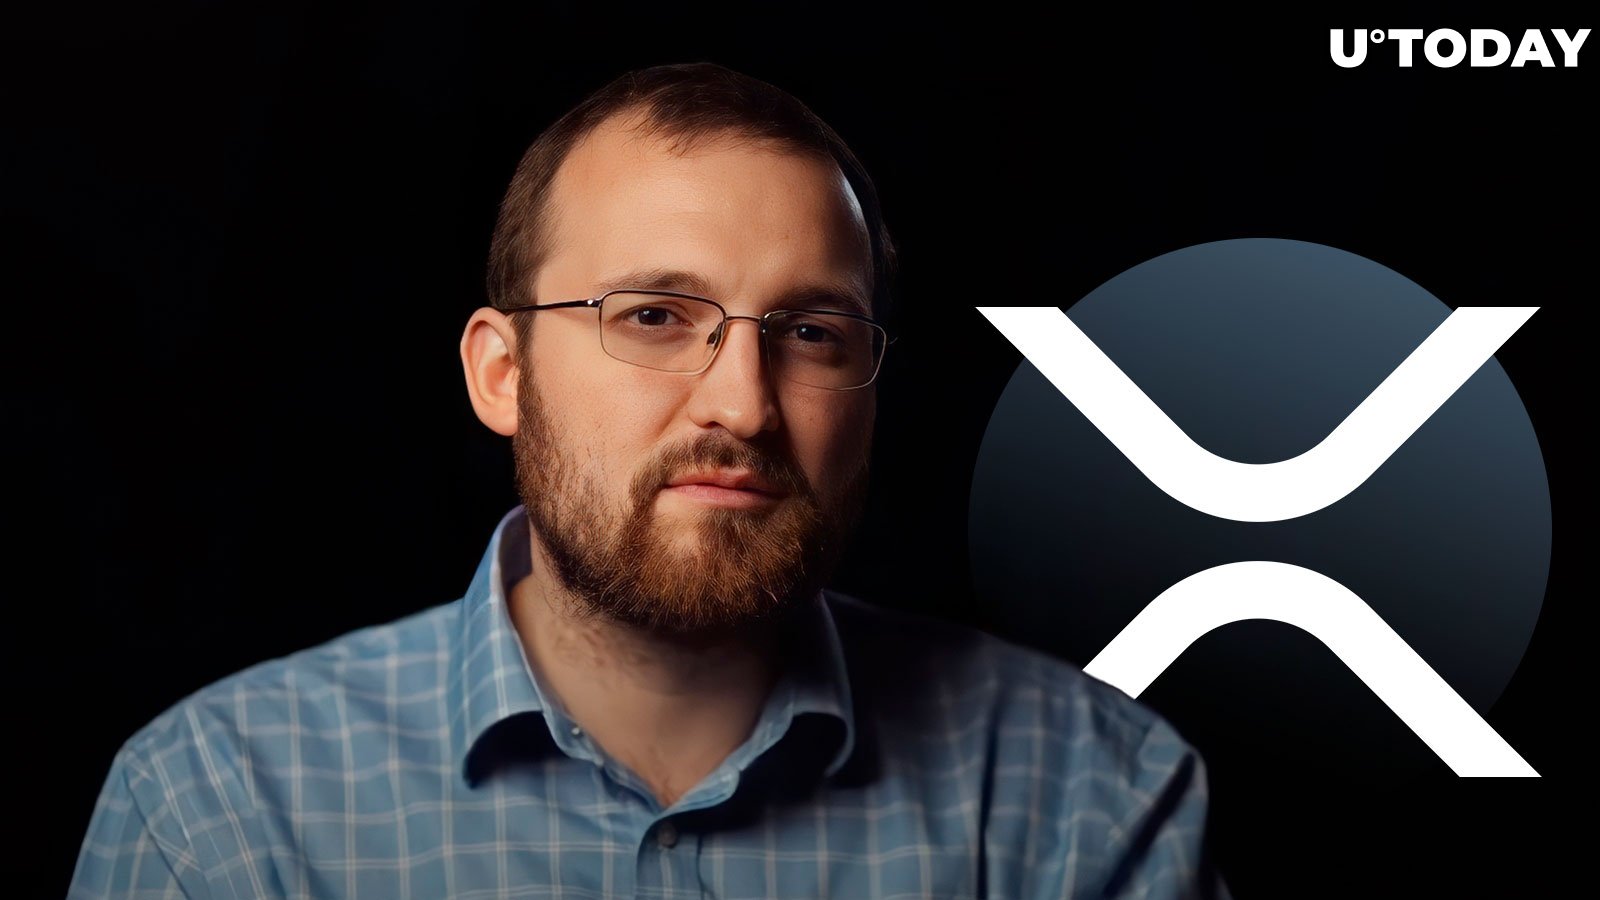 Cardano Founder Sets the Record Straight About XRP Community's Ethereum Conspiracy